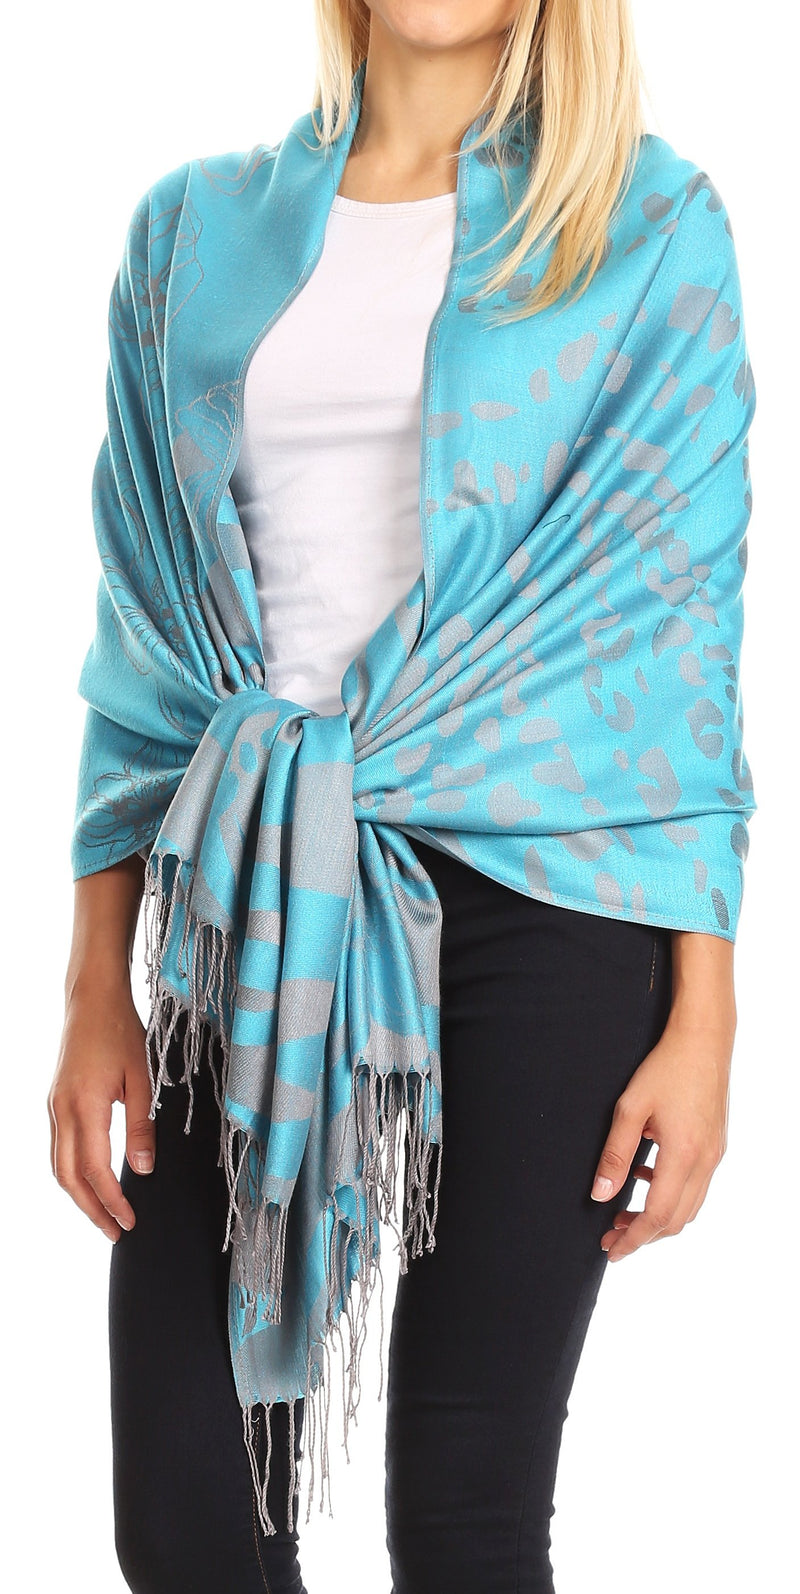 Sakkas Salome  Reversible Silky soft Wrap Shawl Scarf with Lovely Floral Brocade